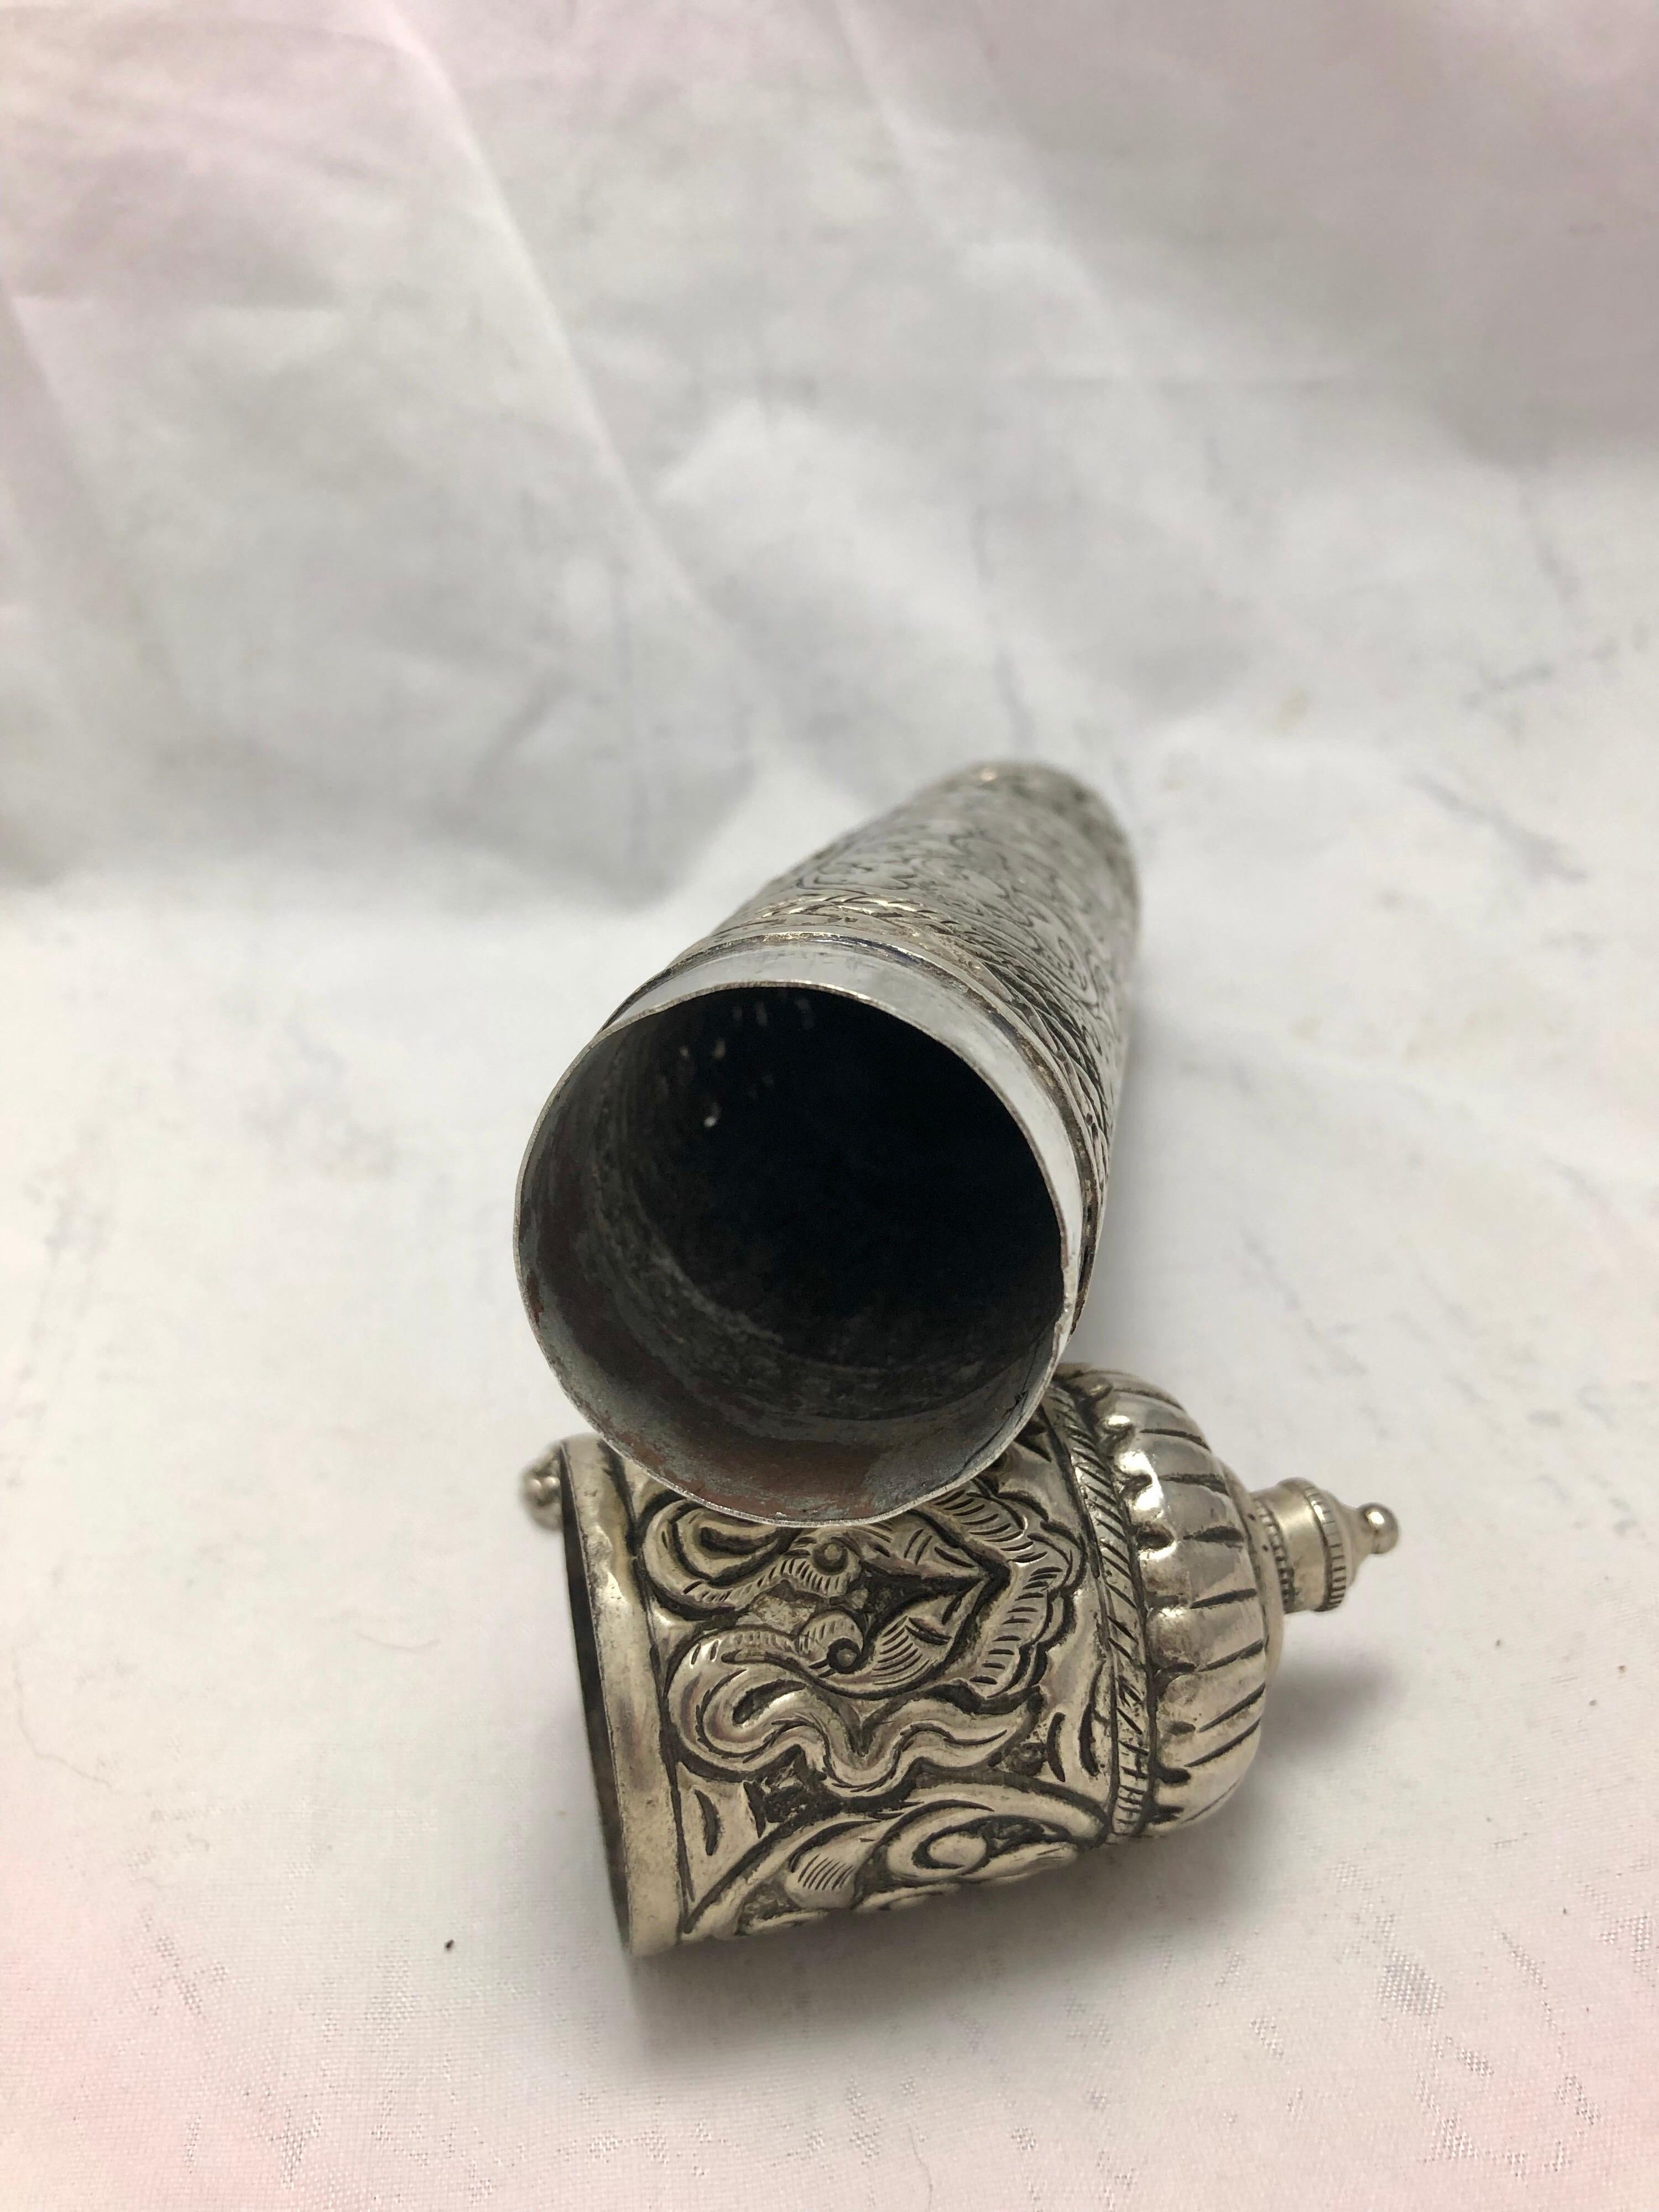 Islamic Mid-19th Century Ornate Silver Scroll Holder, Moroccan Jewish Judaica Antique For Sale